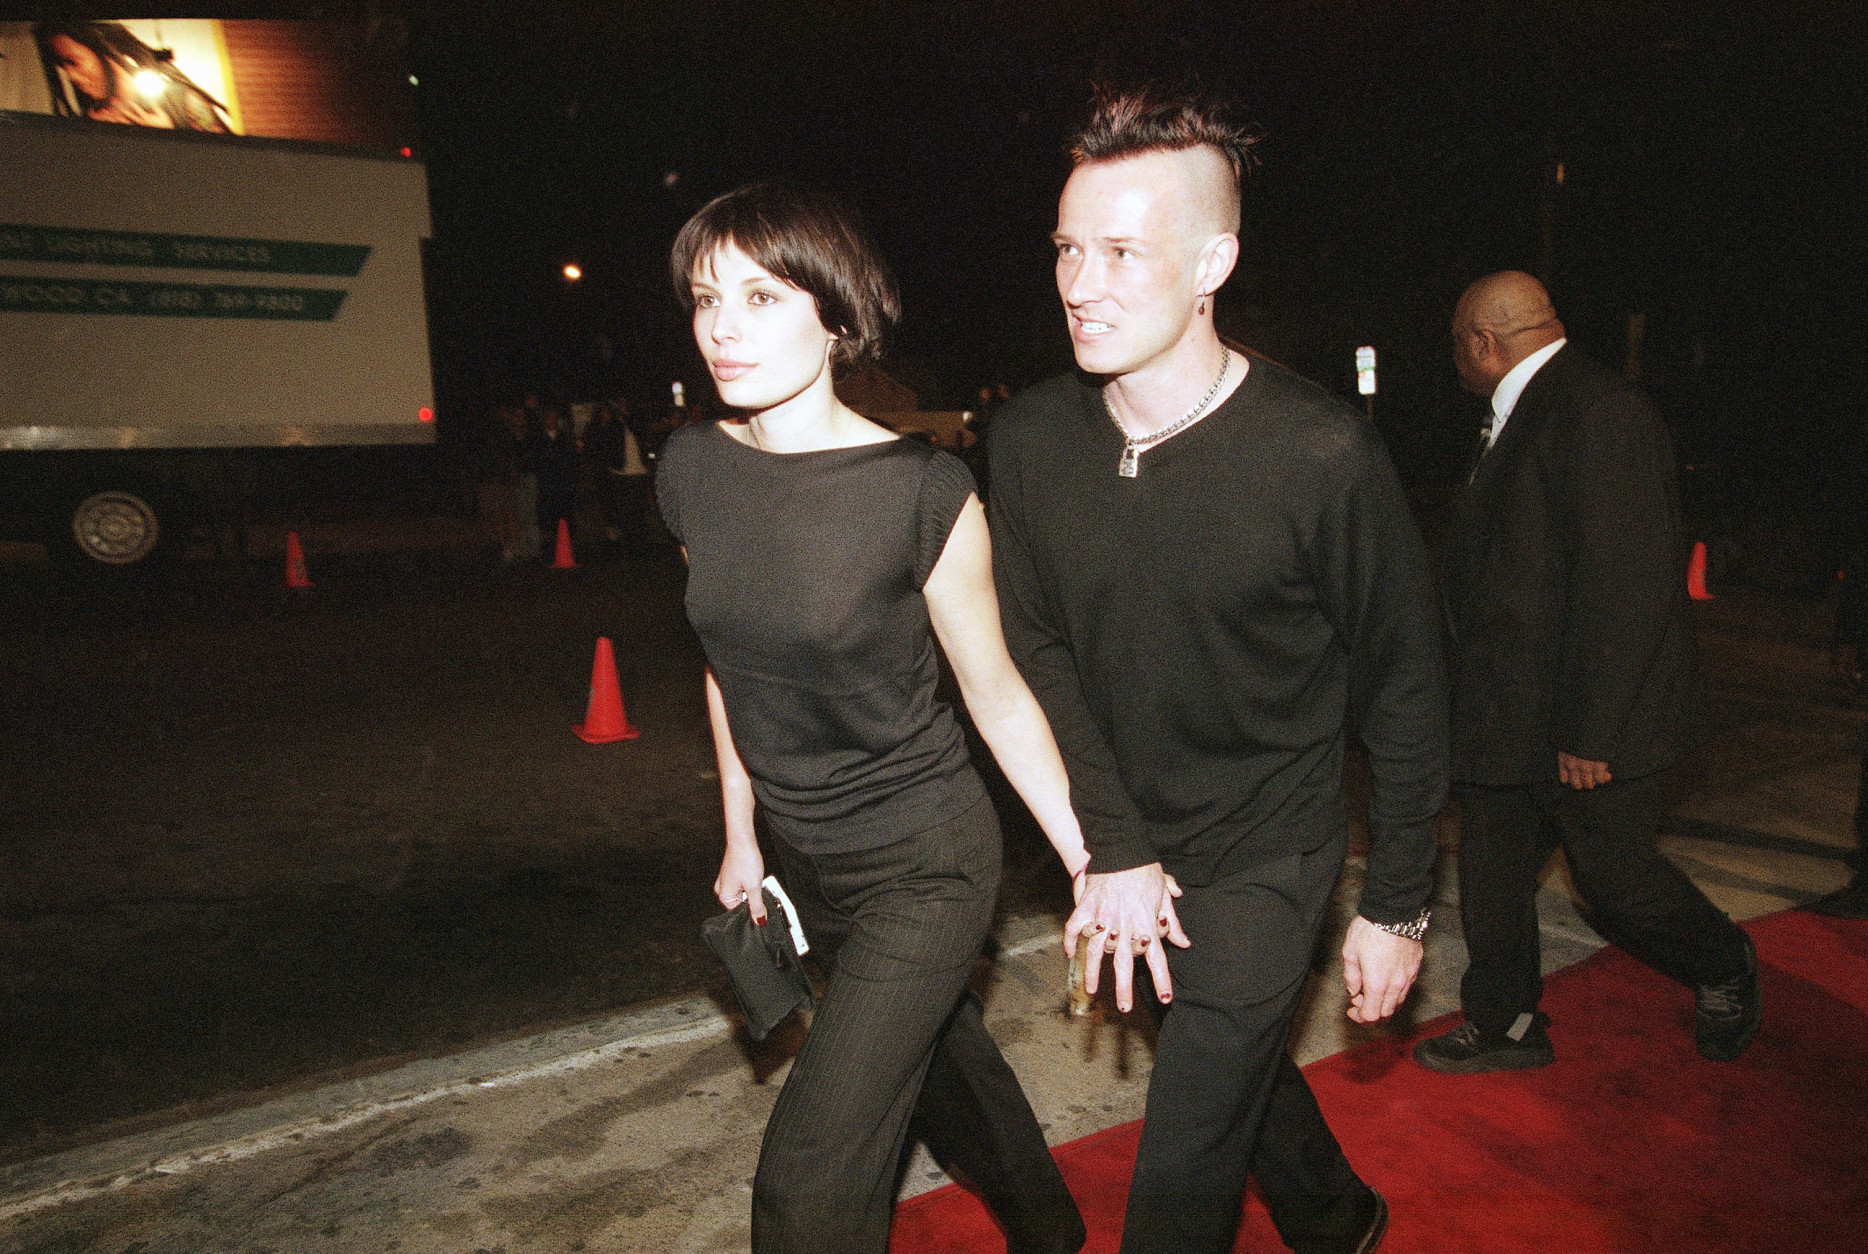 Scott Weiland, vocalist of the re-formed Stone Temple Pilots rock band, arrives with his girlfriend, Mary Frosberg, at the grand re-opening of the Viper Room club in West Hollywood, California, Saturday, Jan. 9, 1998. The event featured a performance by the rock band Hole. (AP Photo/Chris Pizzello)